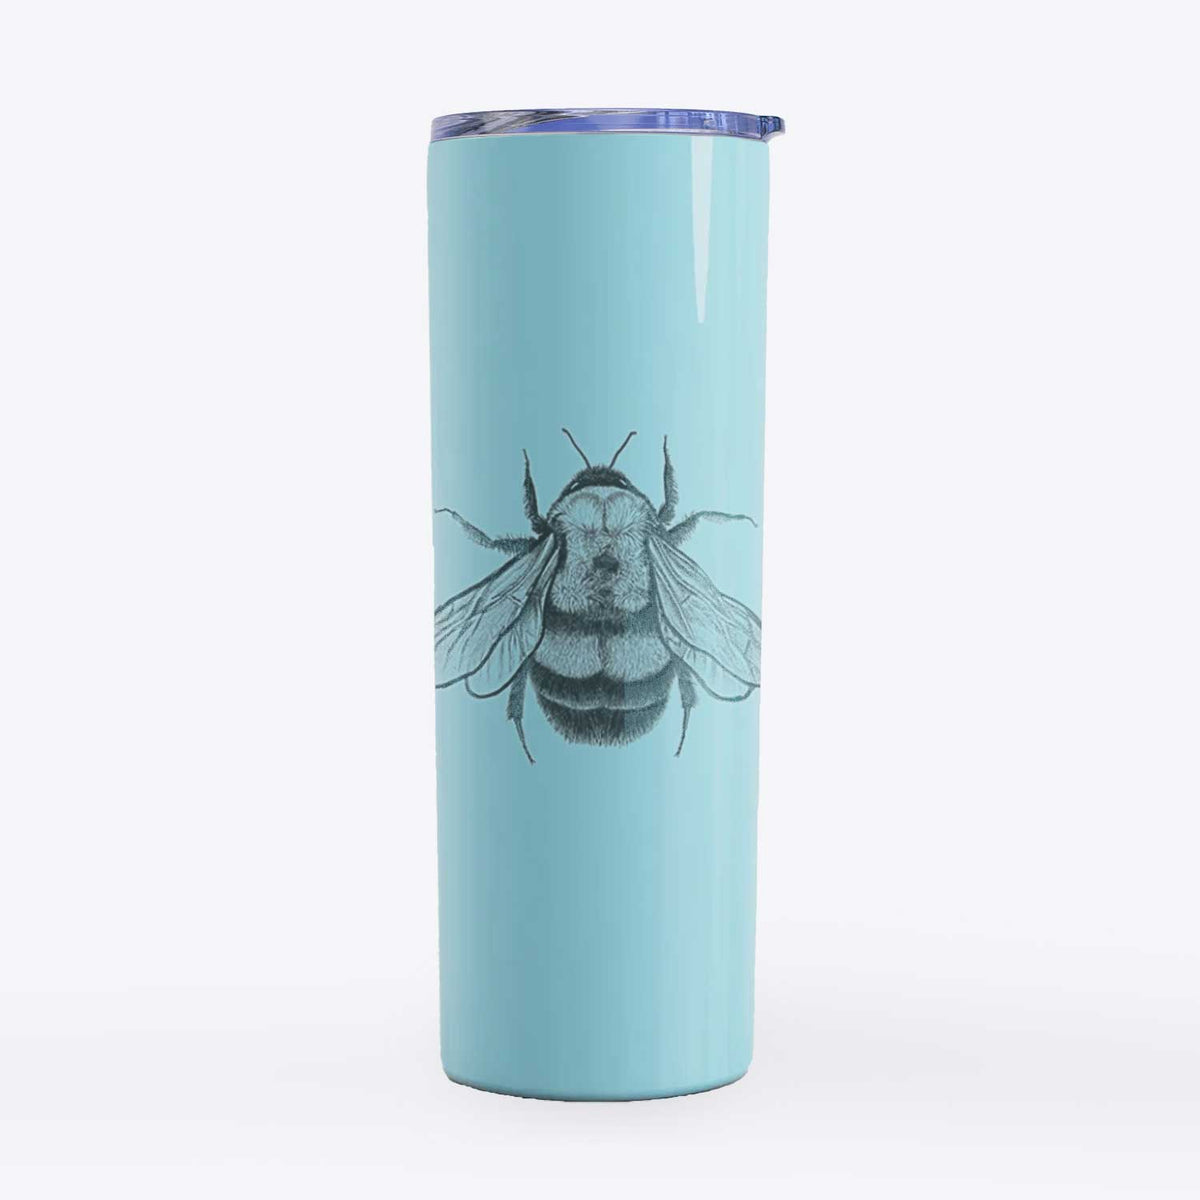 Bombus Affinis - Rusty-Patched Bumble Bee - 20oz Skinny Tumbler